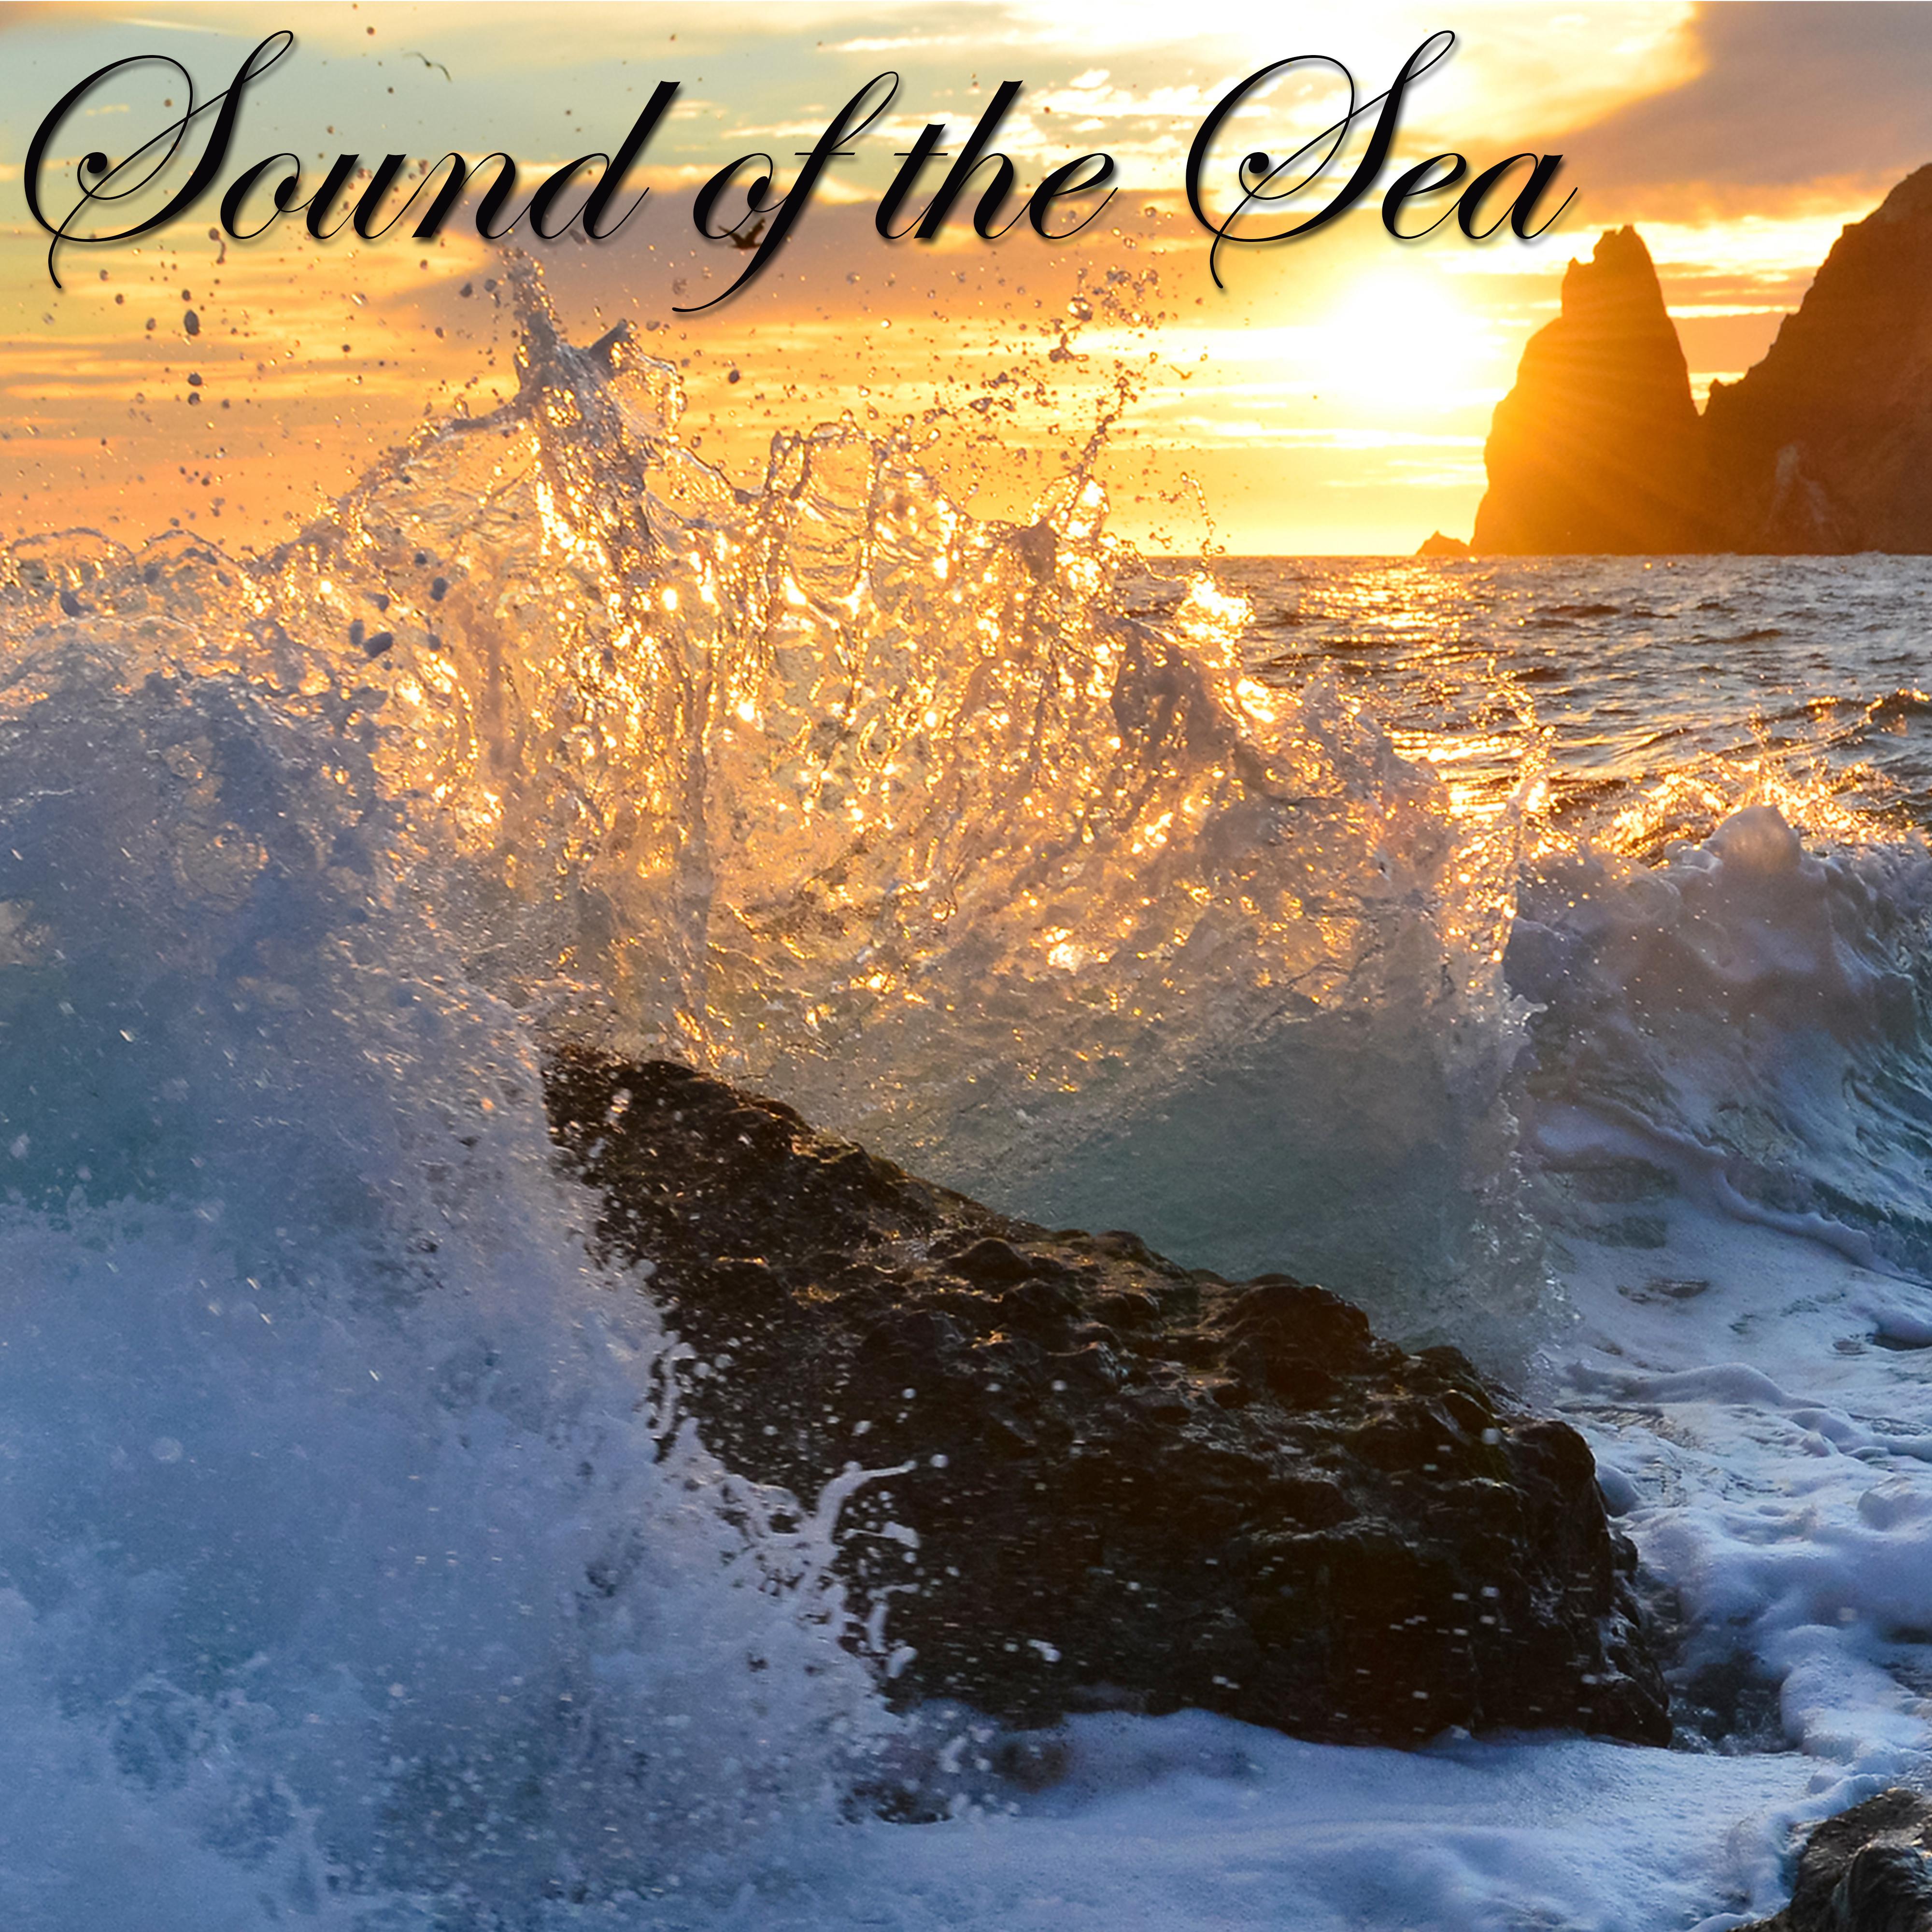 Sound of the Sea  New Age Amazing Music with Sea  Ocean Waves Relaxing Nature Sounds